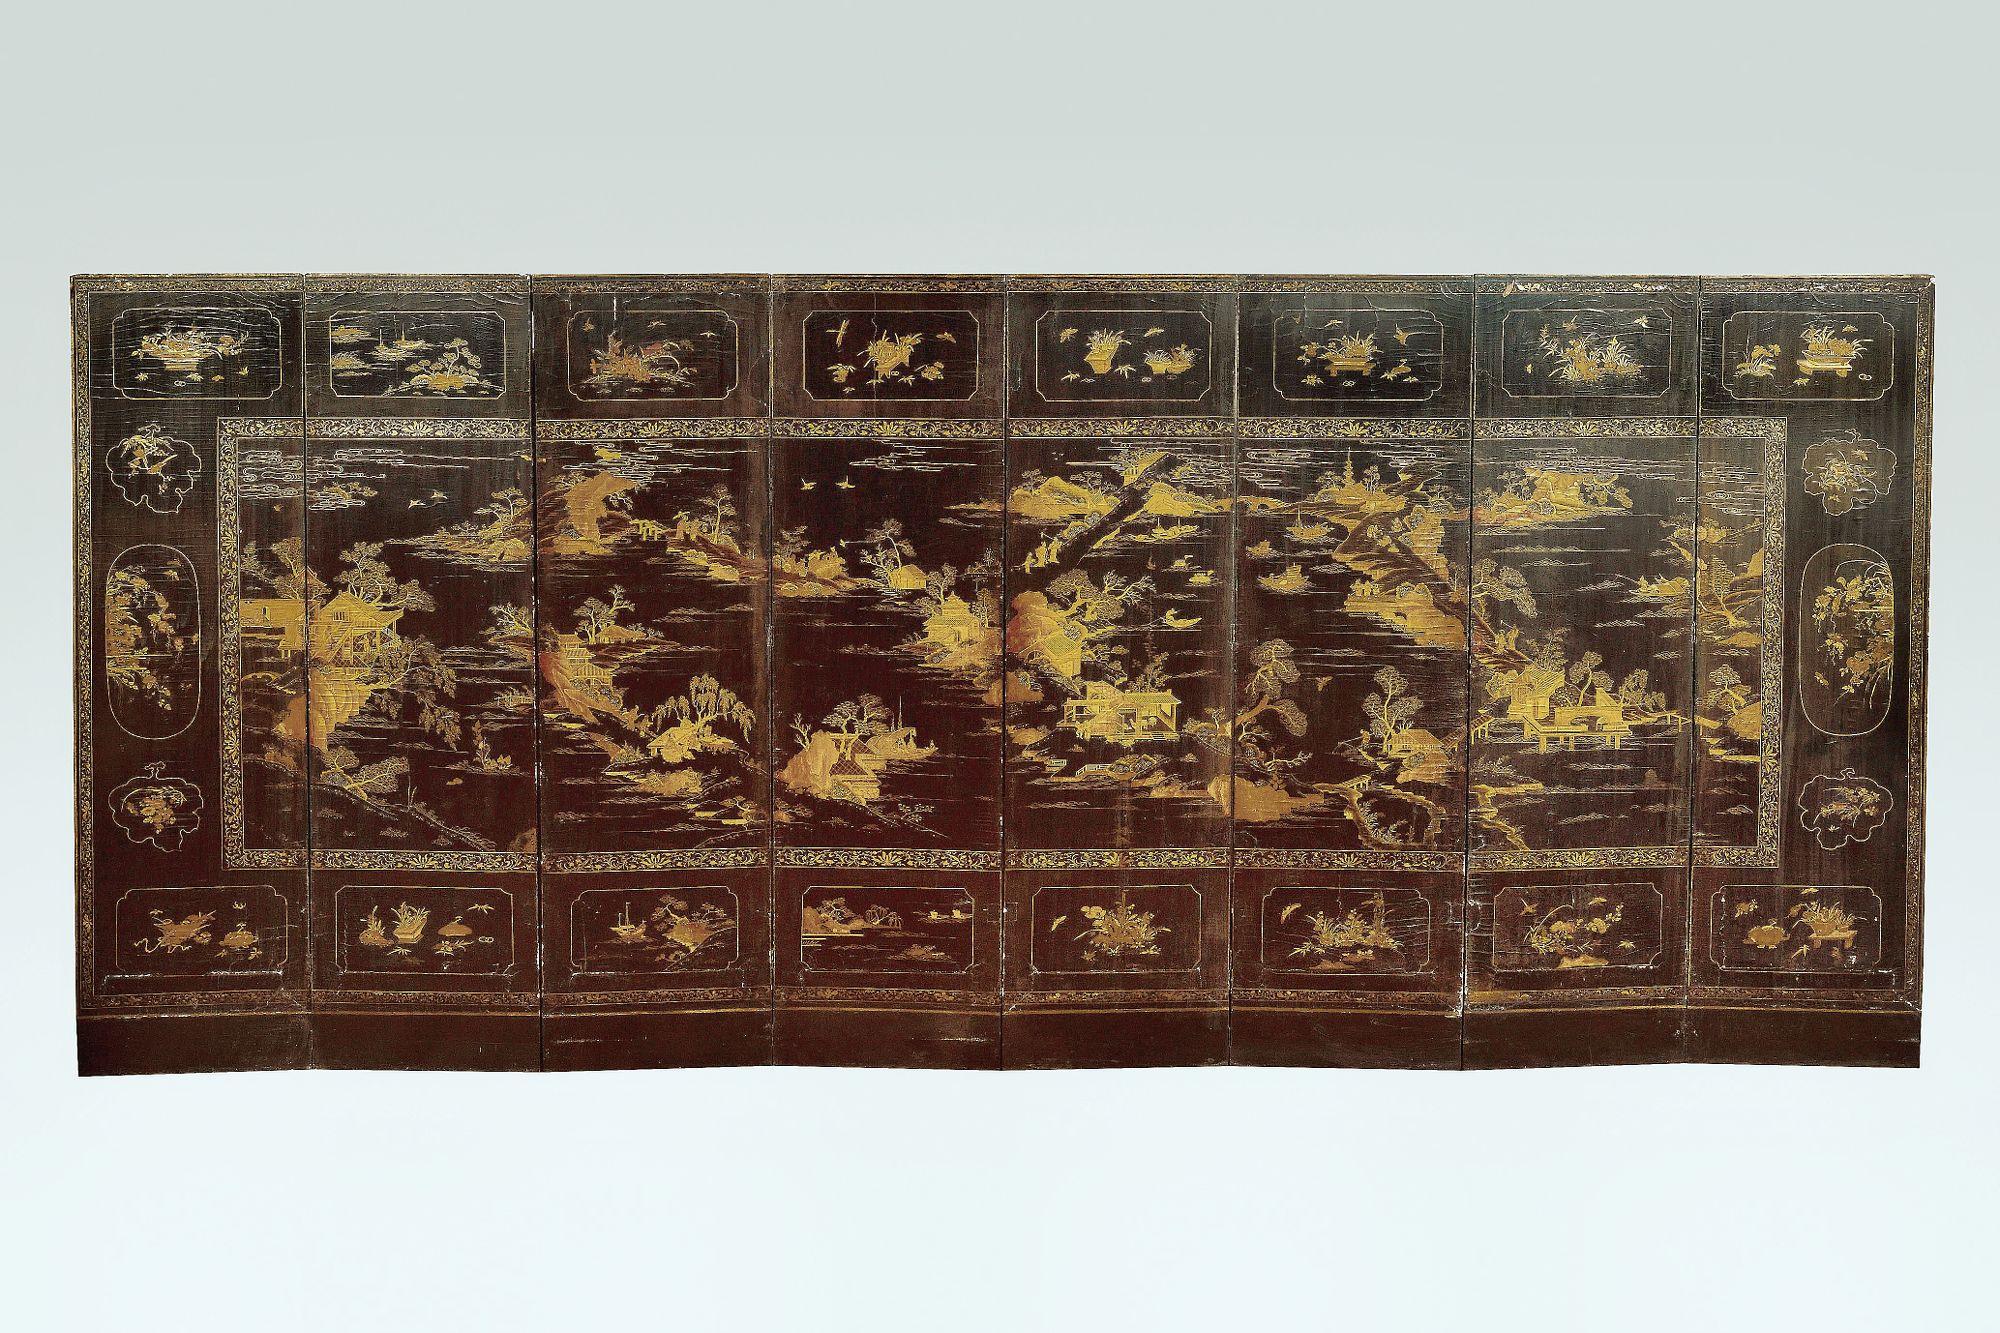 18th Century Large 8-wing-screen in Coromandel Lacquer, China, Quing, Late 18th/Early 19th For Sale